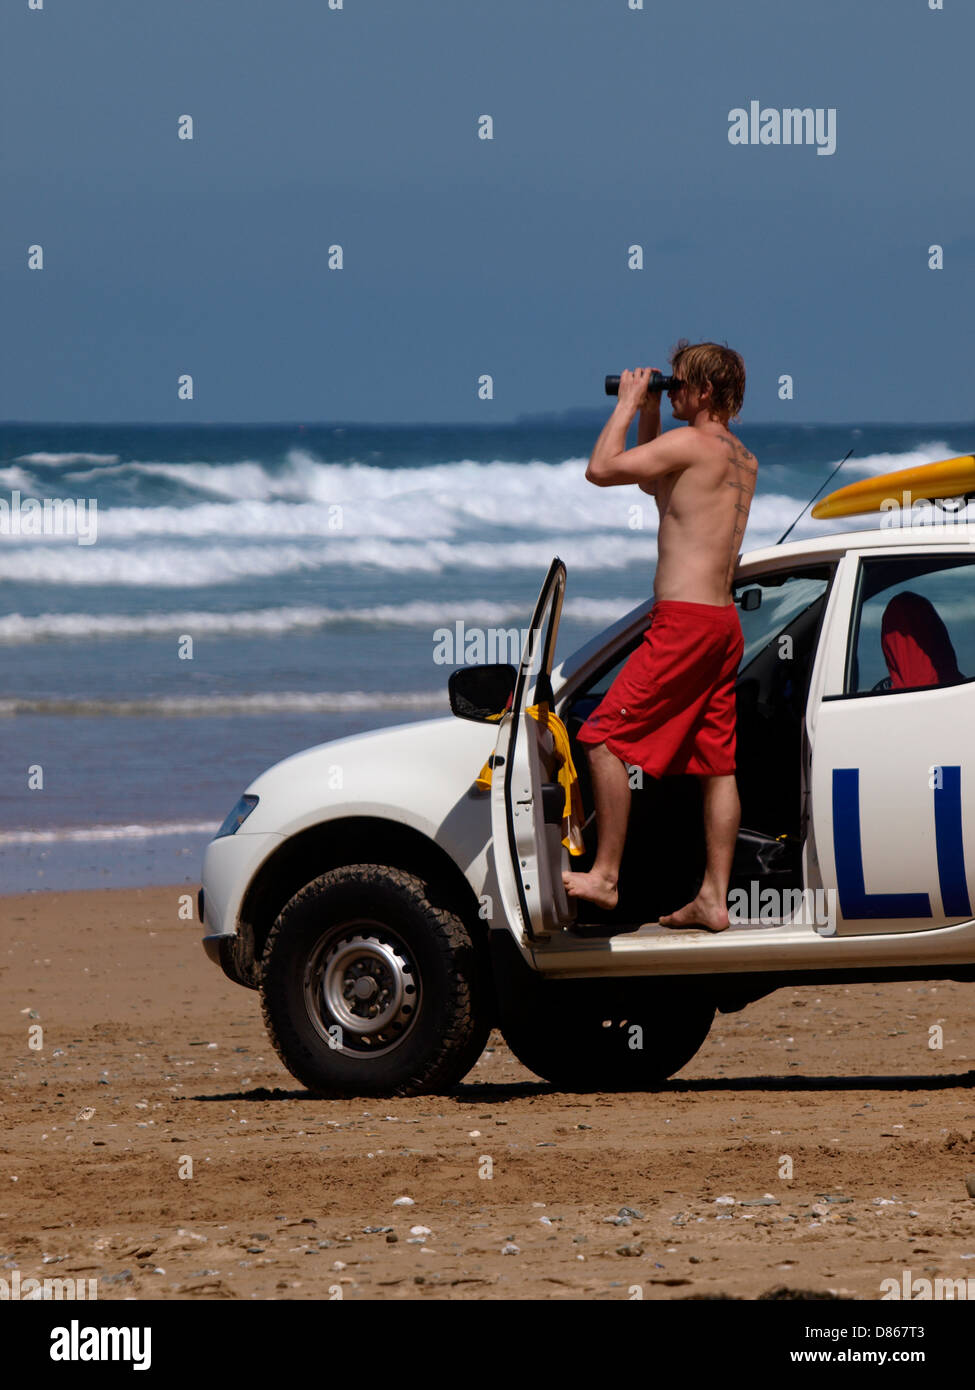 Beach Life Guard, le Watergate Bay, Cornwall, UK 2013 Banque D'Images